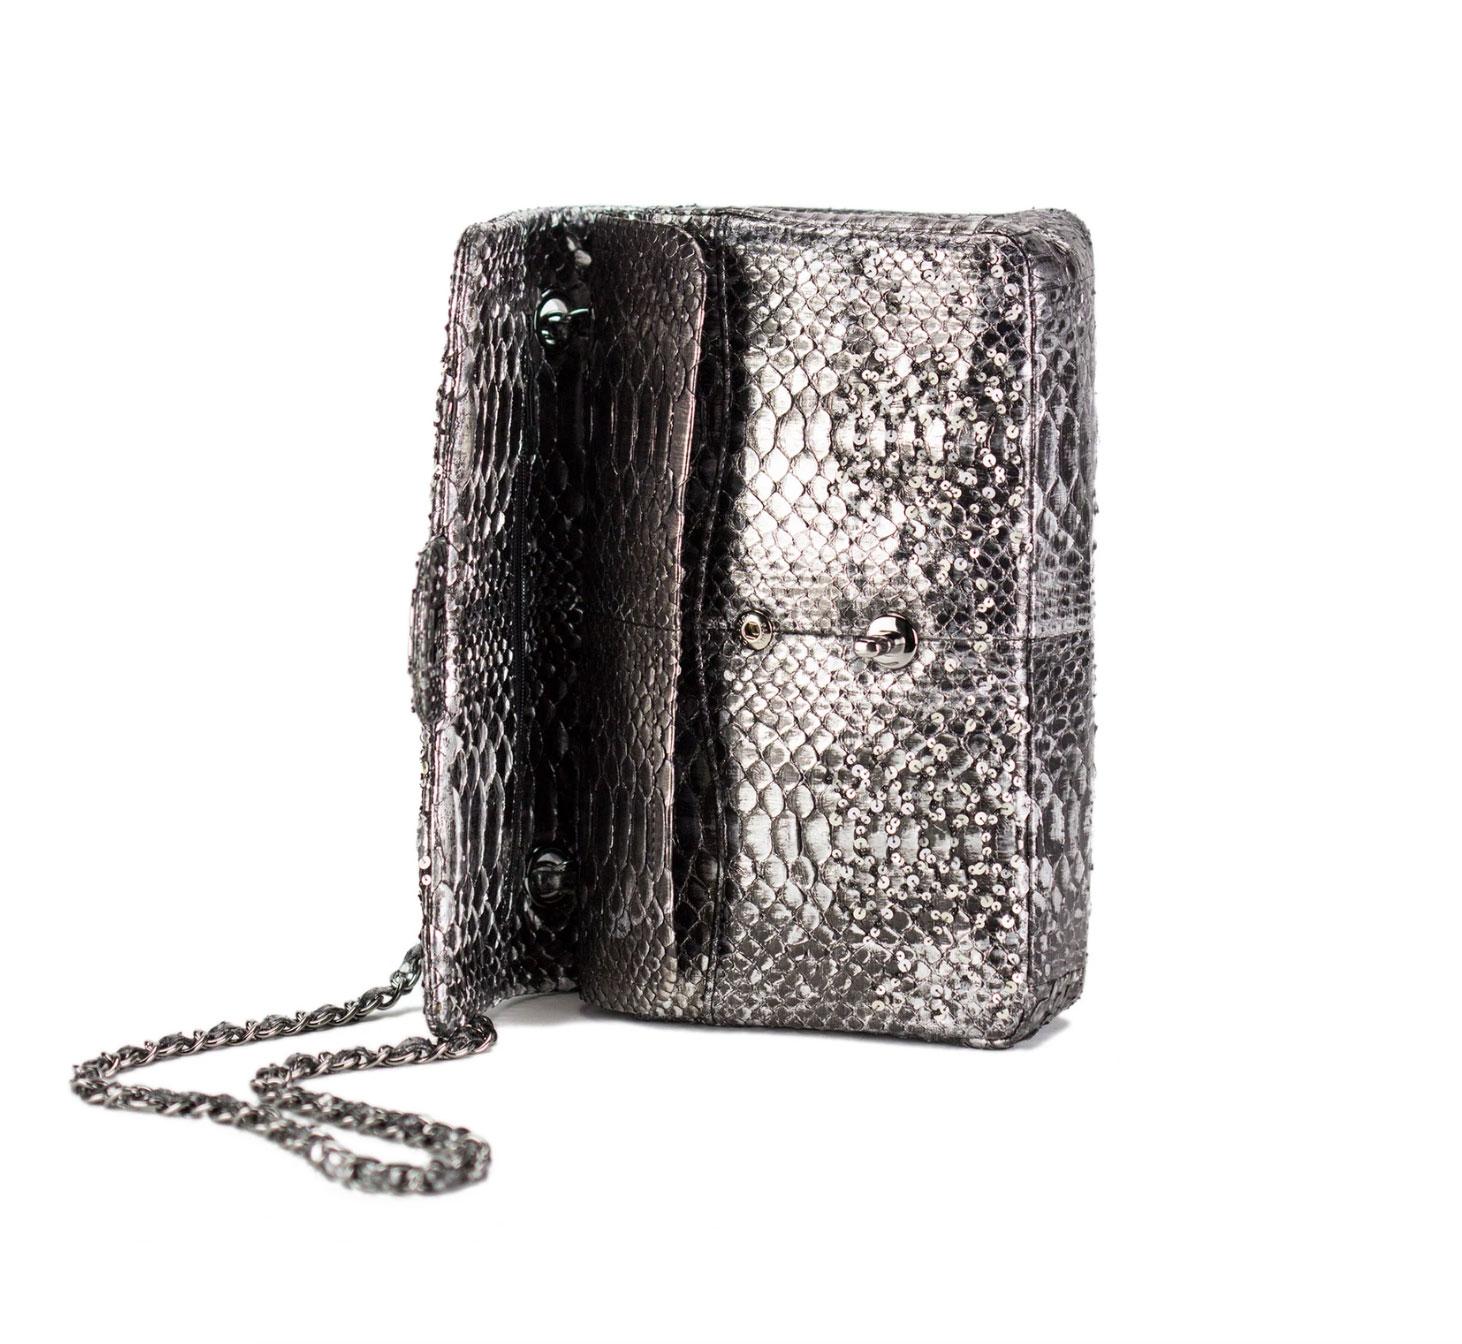 Chanel Classic Flap Exotic Limited Edition Metallic Grey Python Shoulder Bag In Good Condition For Sale In Miami, FL